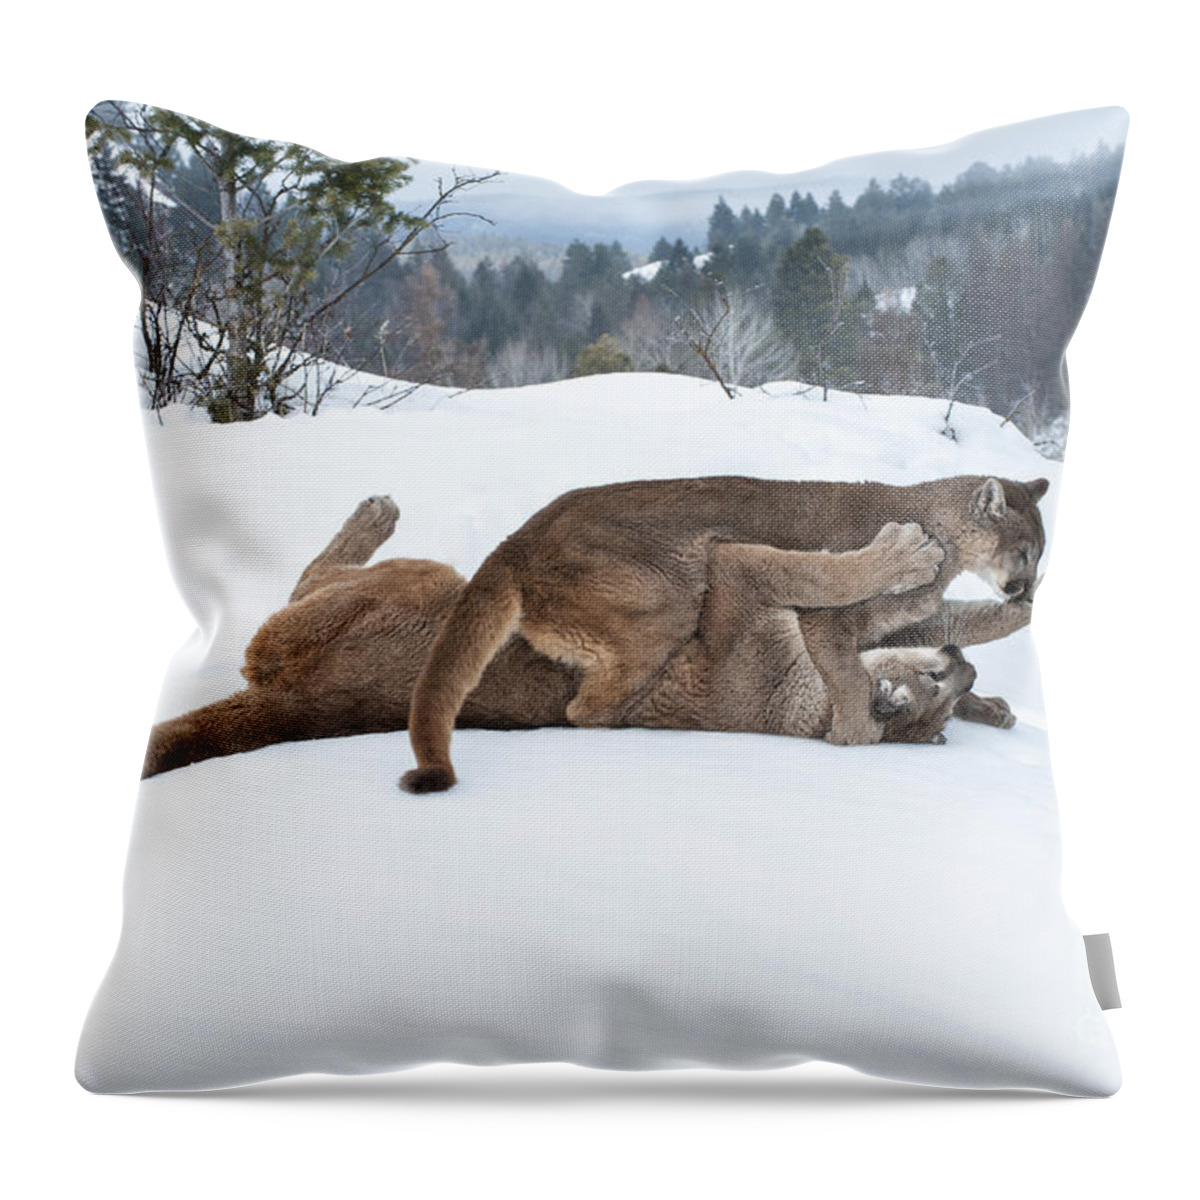 Cougar Throw Pillow featuring the photograph Winter Playground by Sandra Bronstein